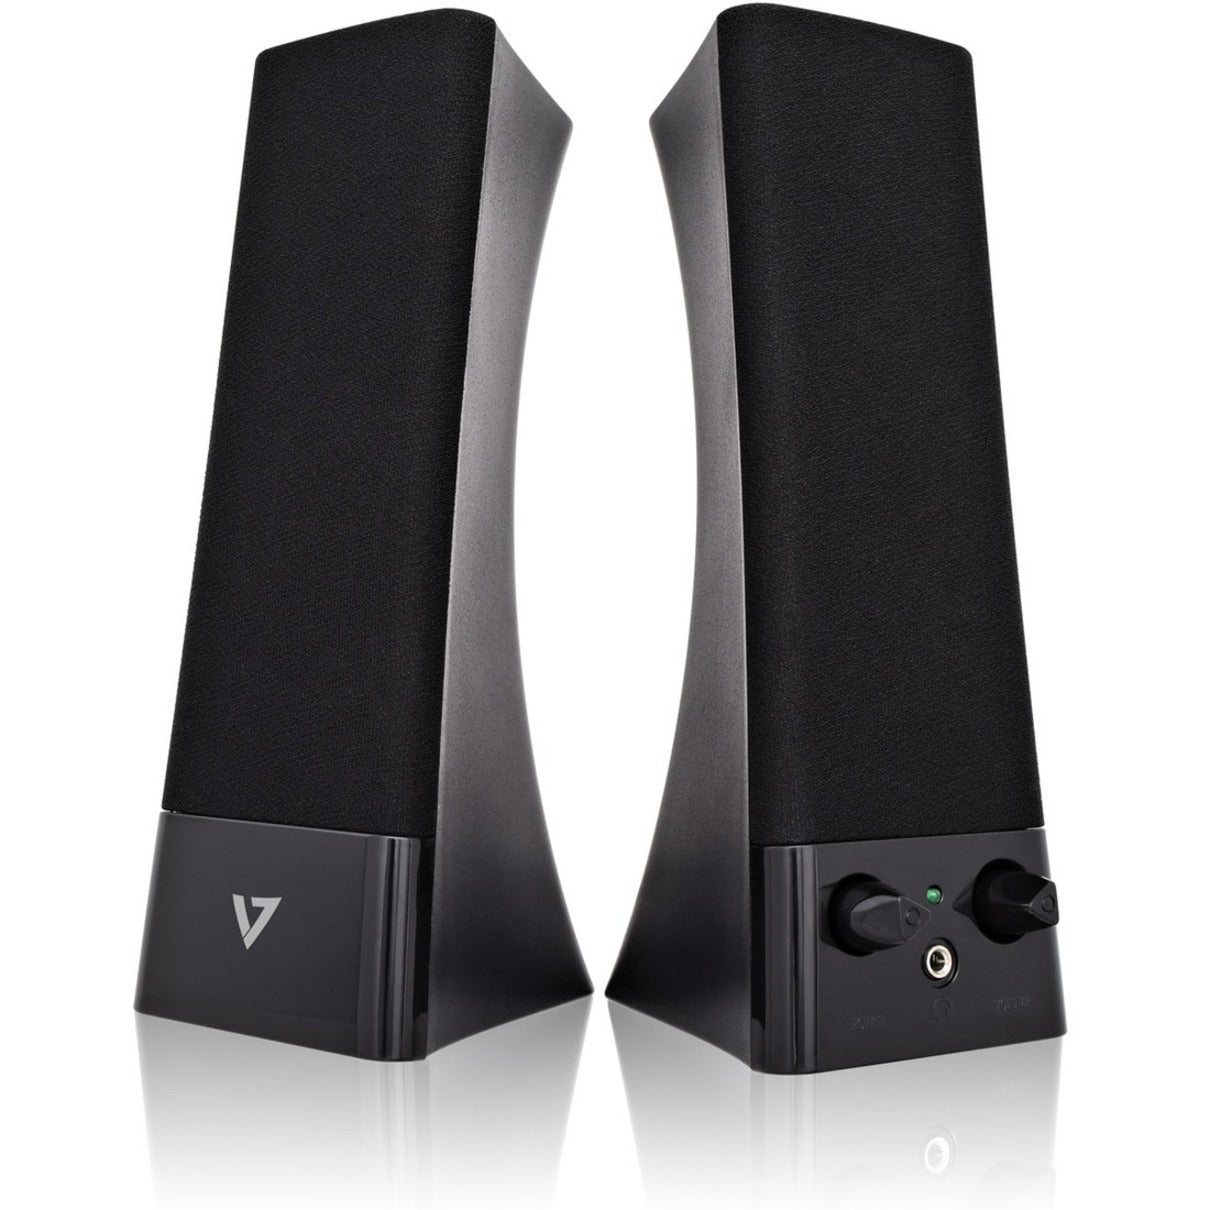 V7 SP2500-USB-6N USB Powered Stereo Speakers, 5W RMS Output Power, 2 Year Warranty, Black